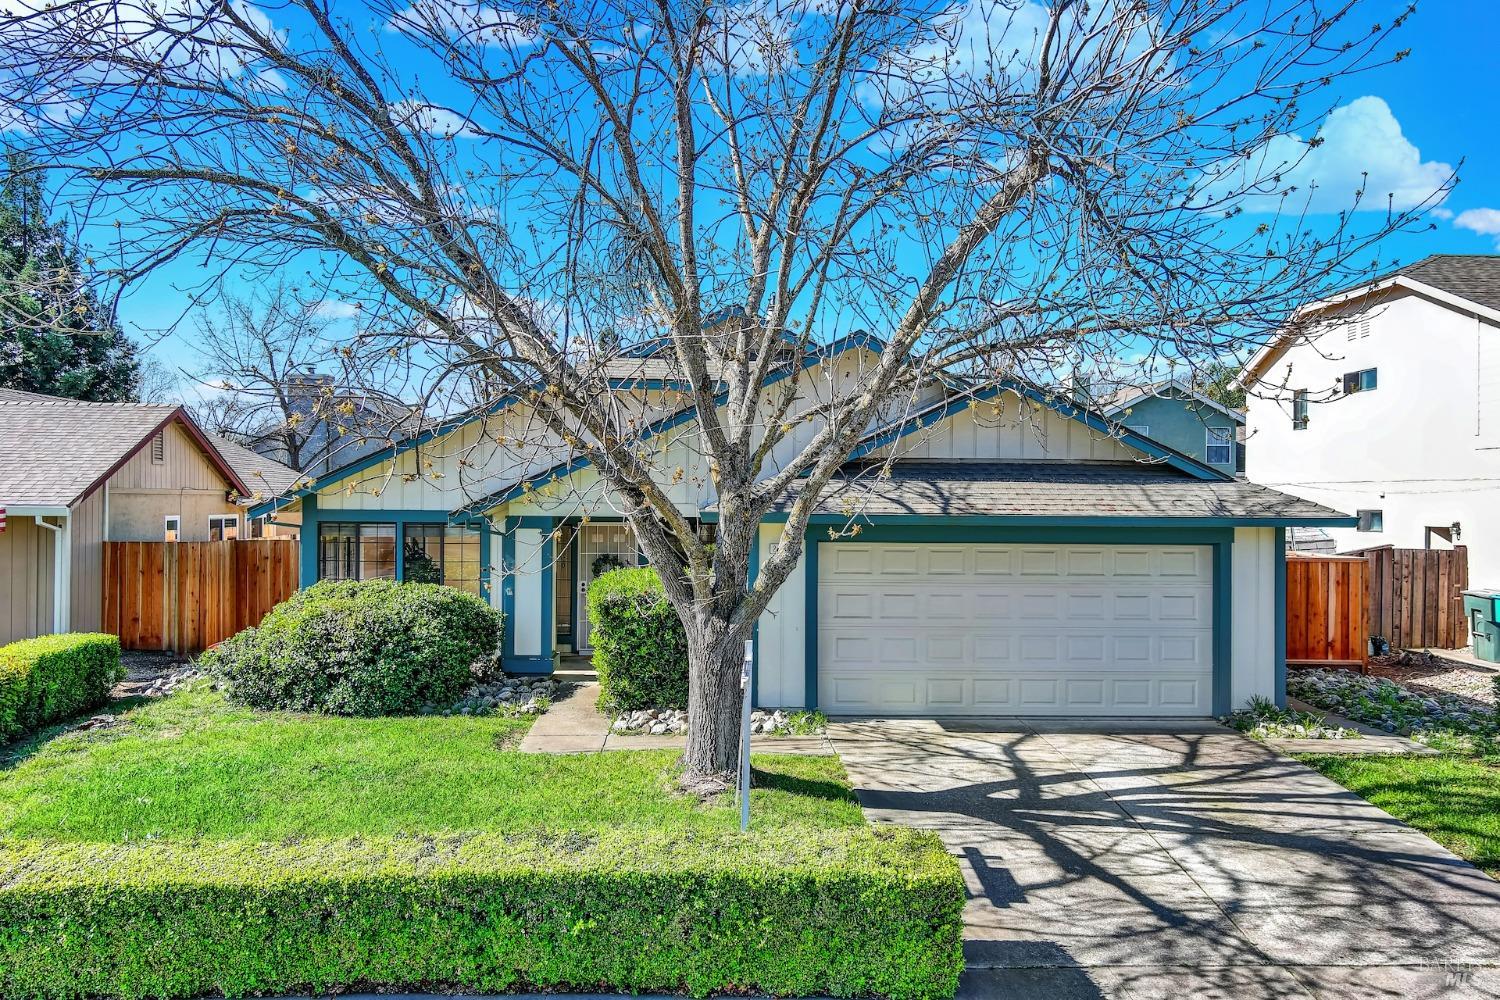 Photo of 2249 Marshall Rd in Vacaville, CA